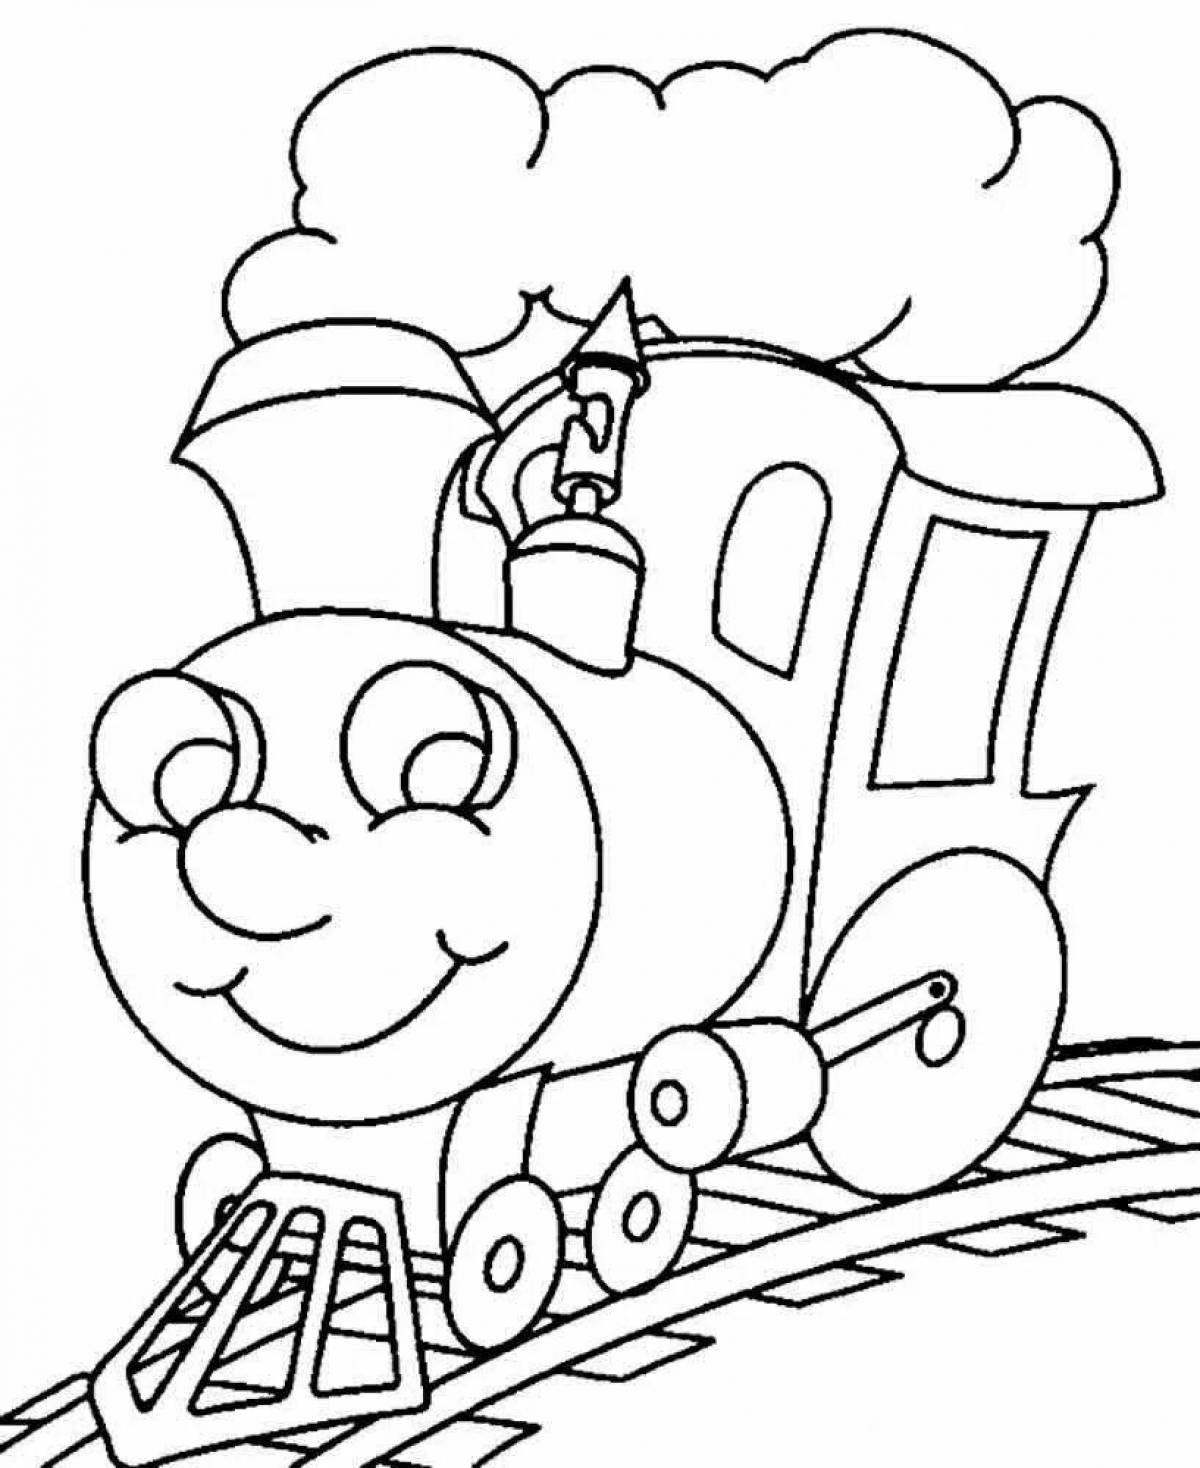 Playful steam locomotive coloring page for kids